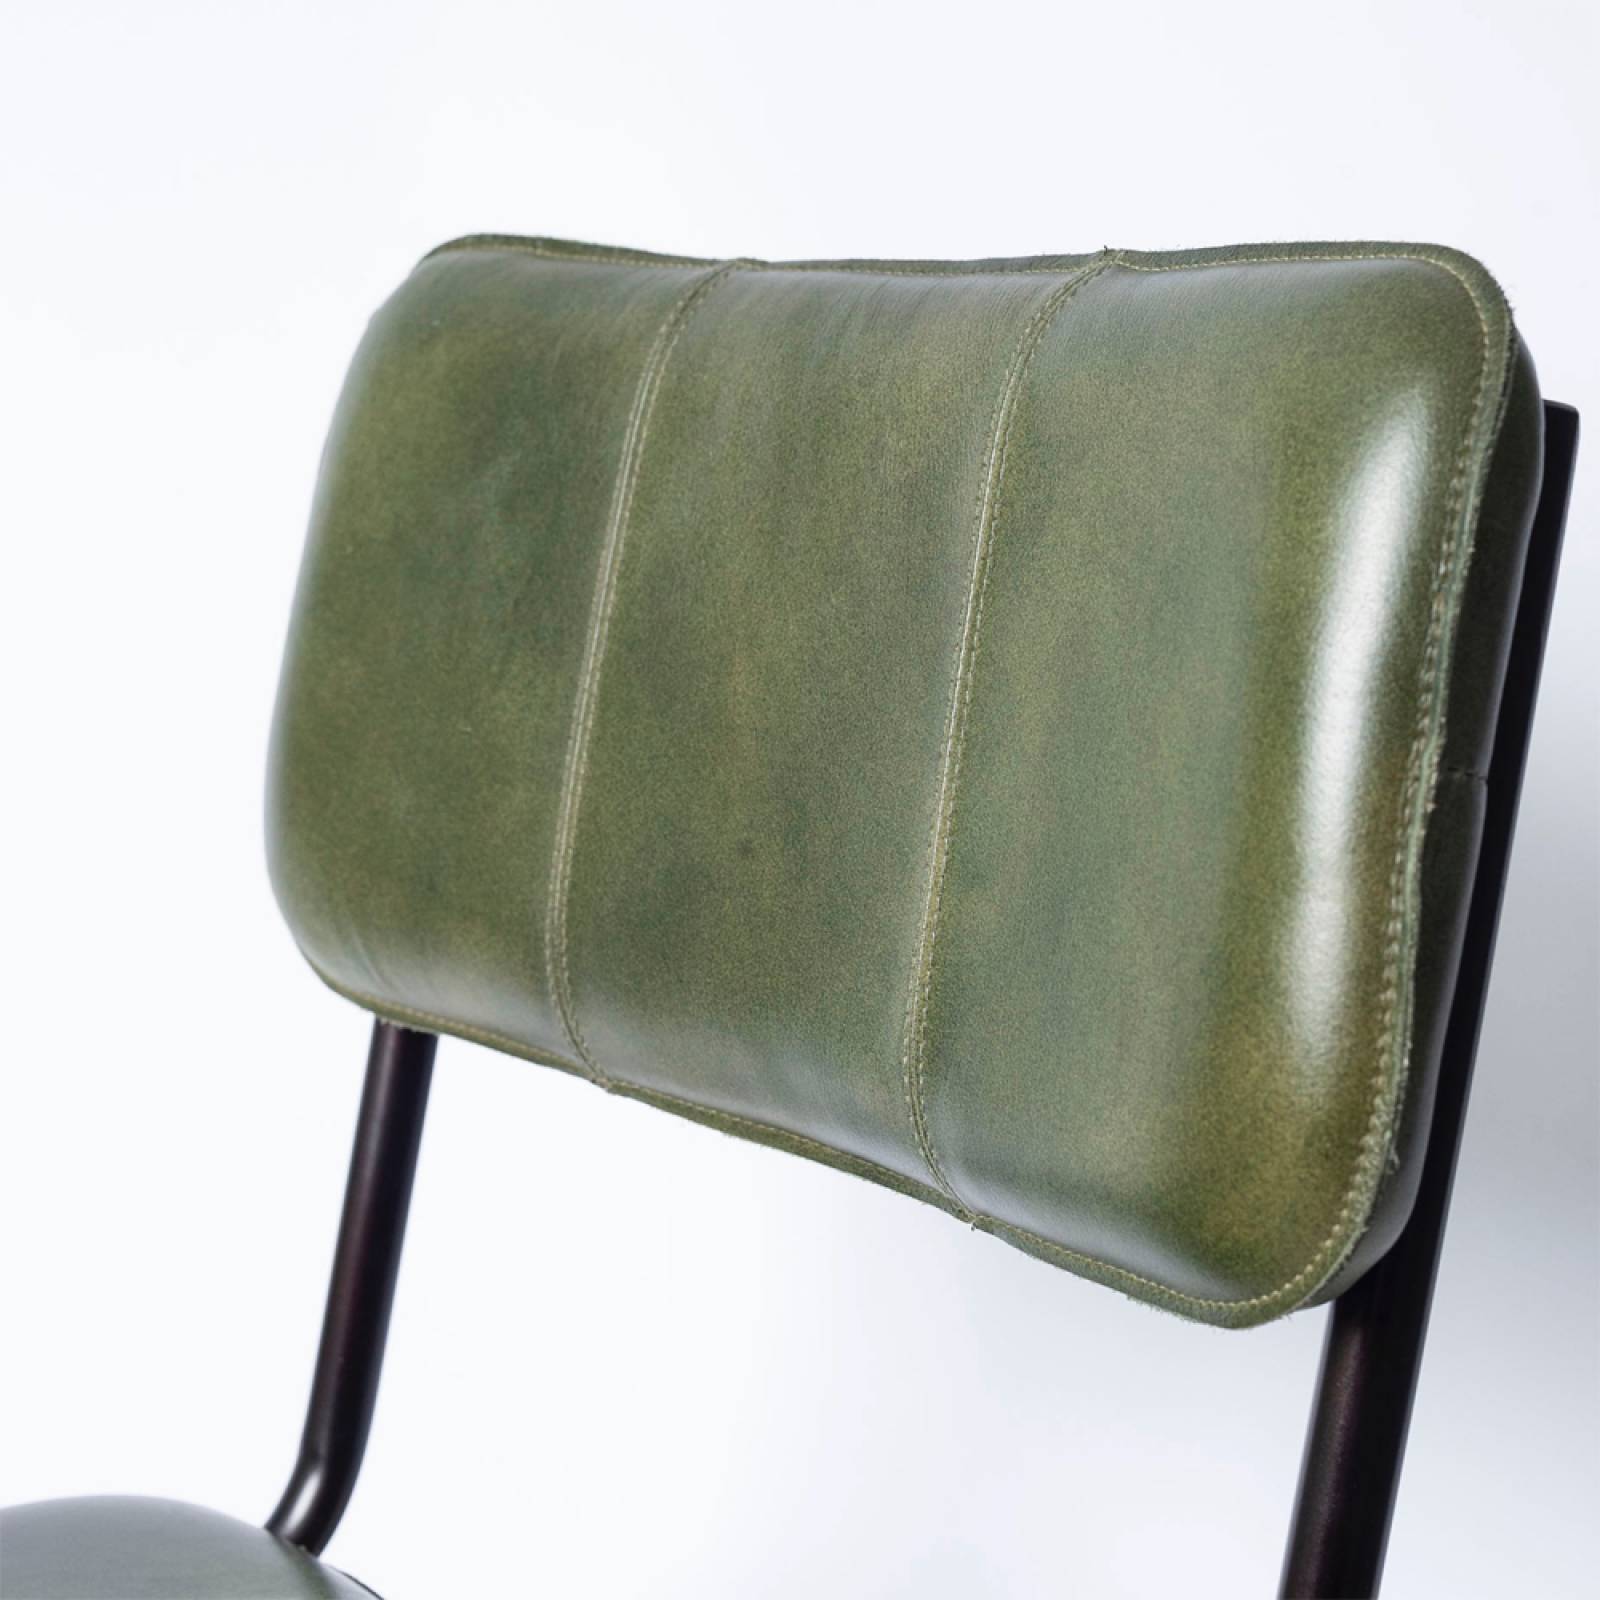 Ukari Dining Chair In Rich Green Leather thumbnails